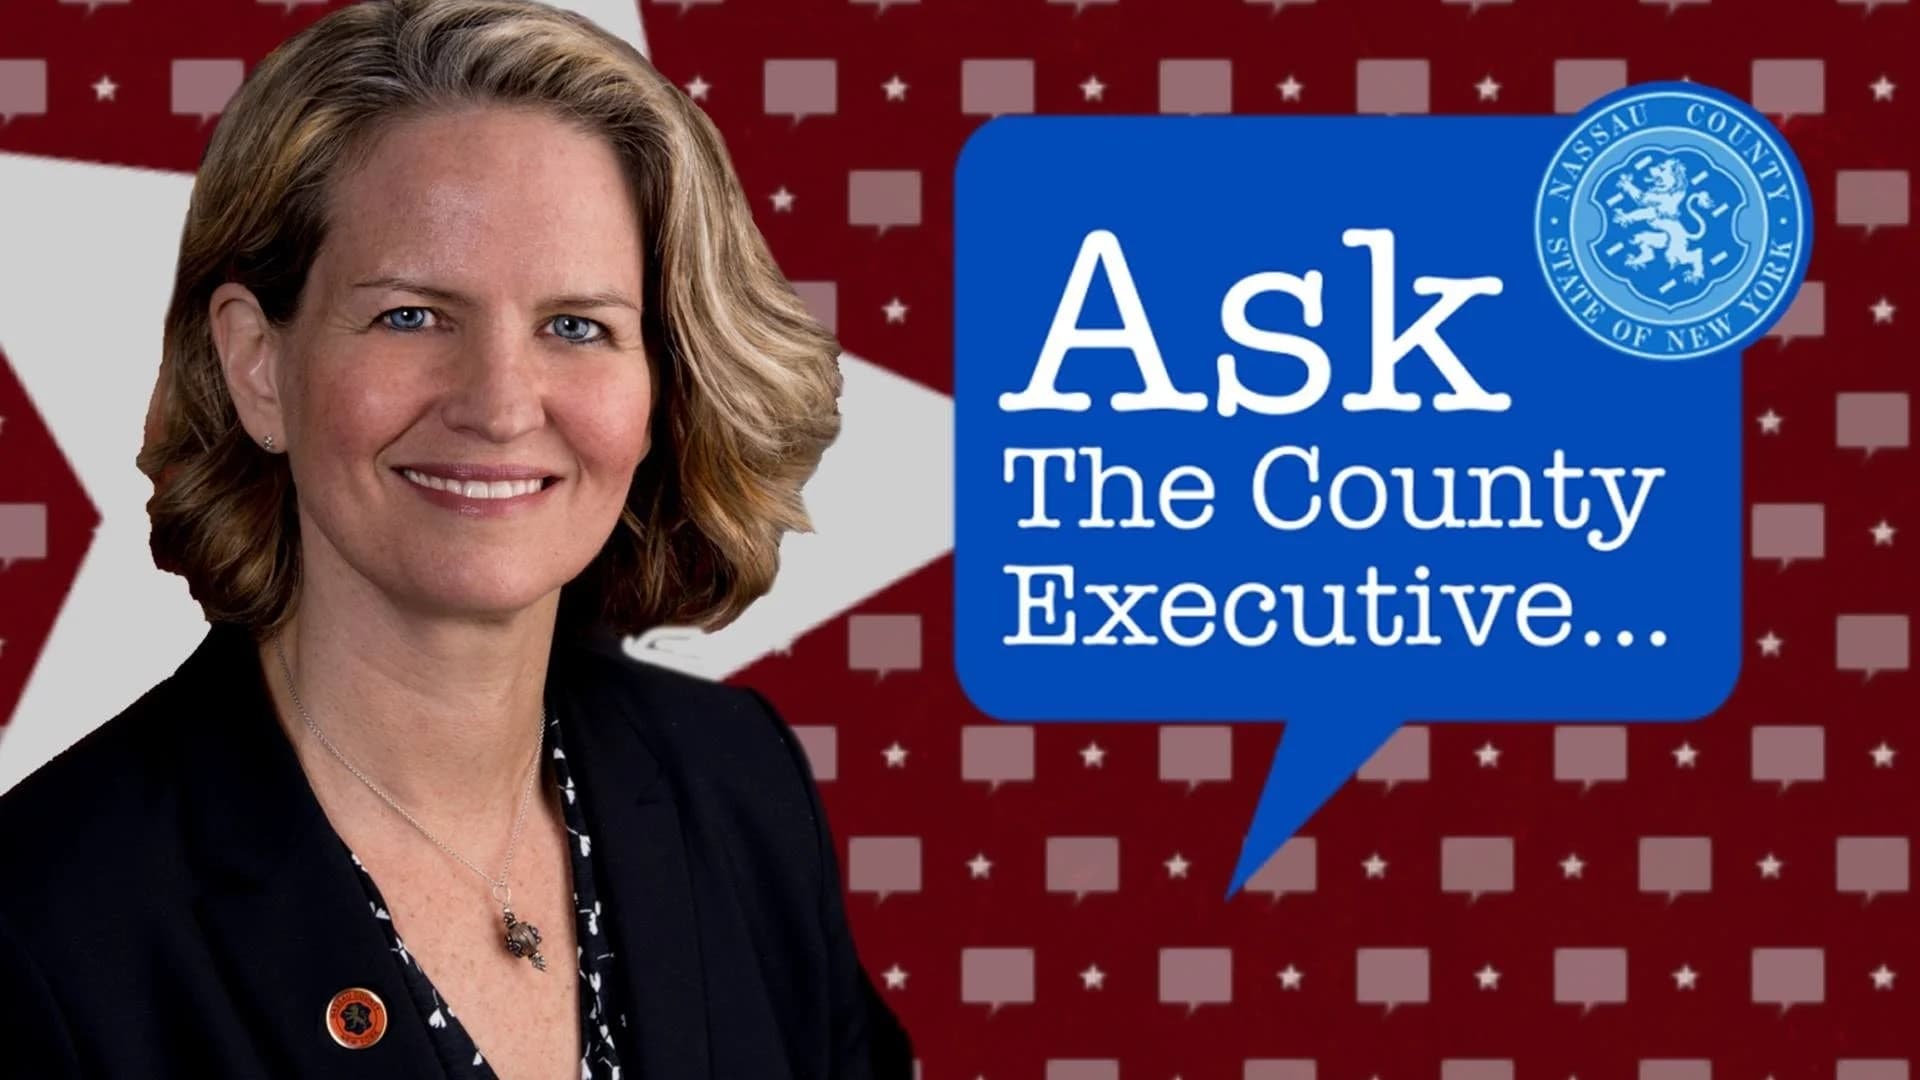 Live coverage - Ask the County Executive